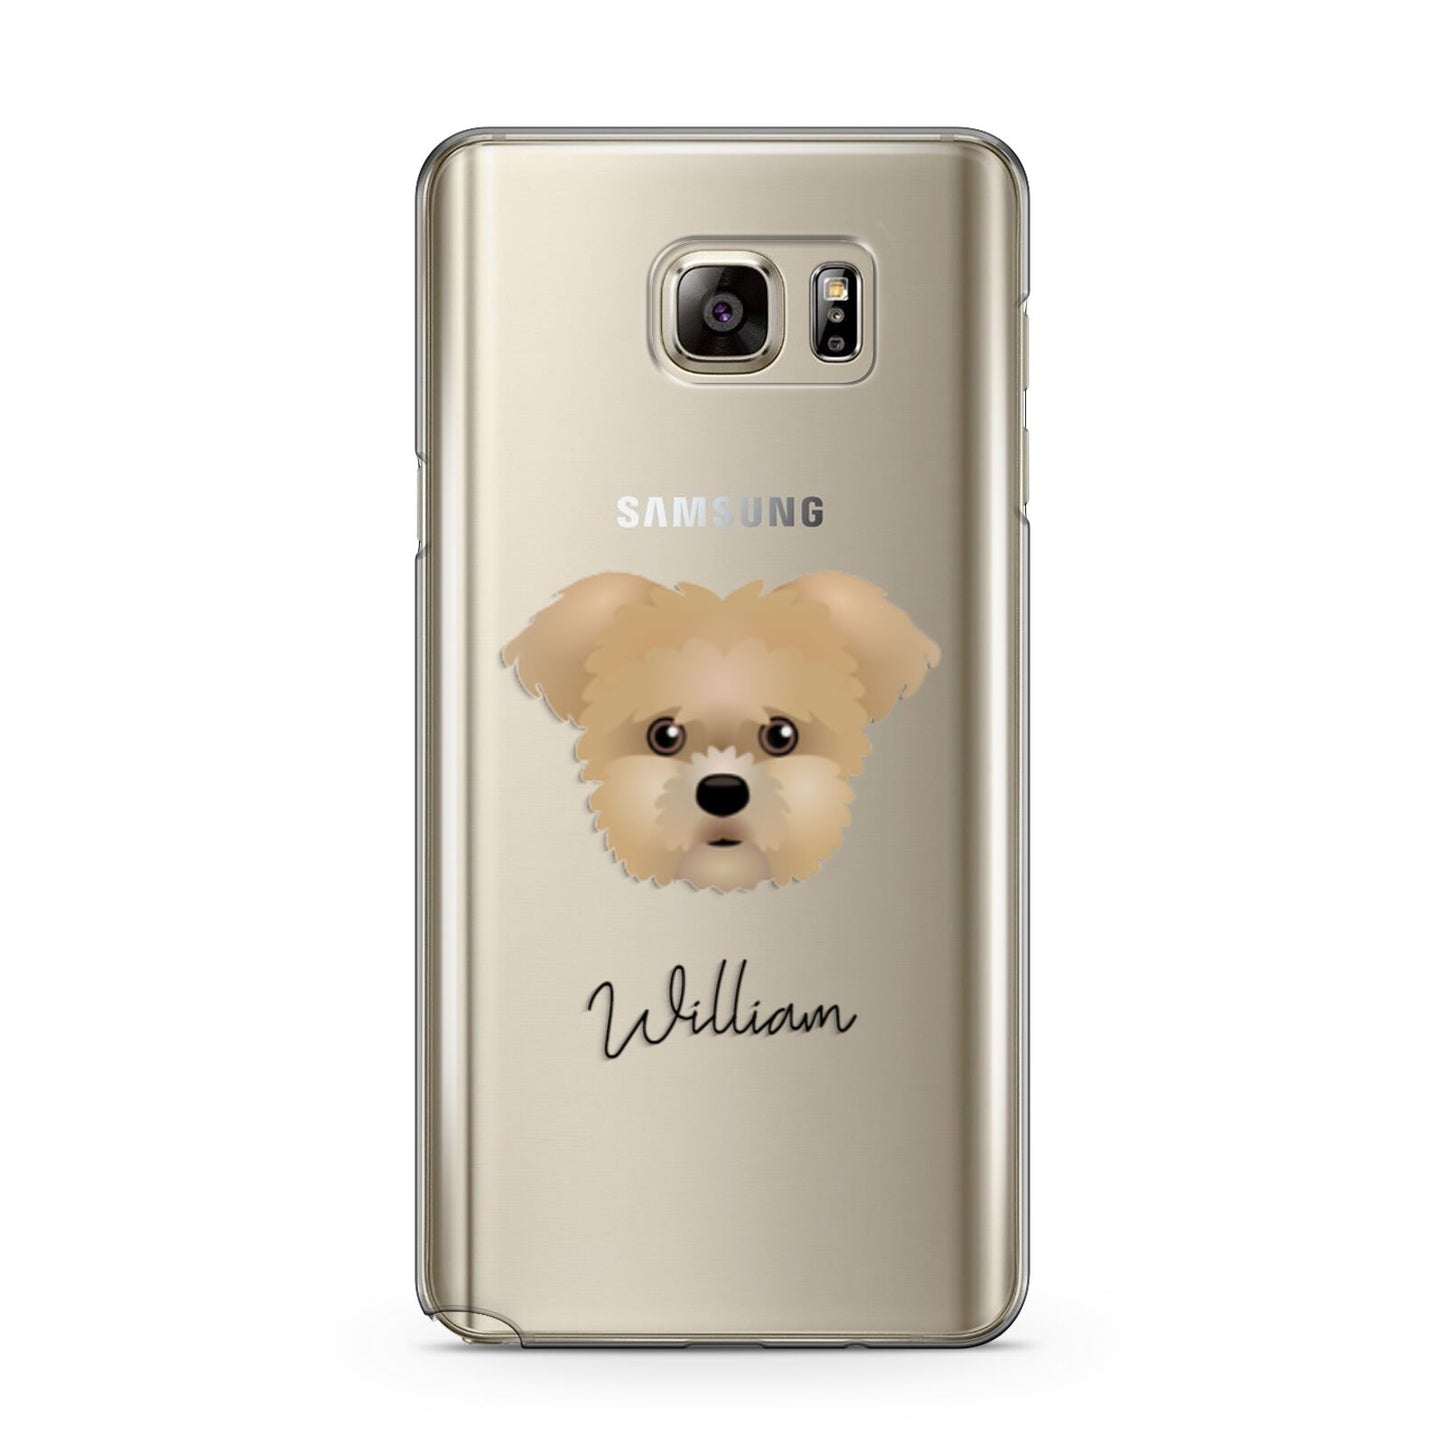 Morkie Personalised Samsung Galaxy Note 5 Case